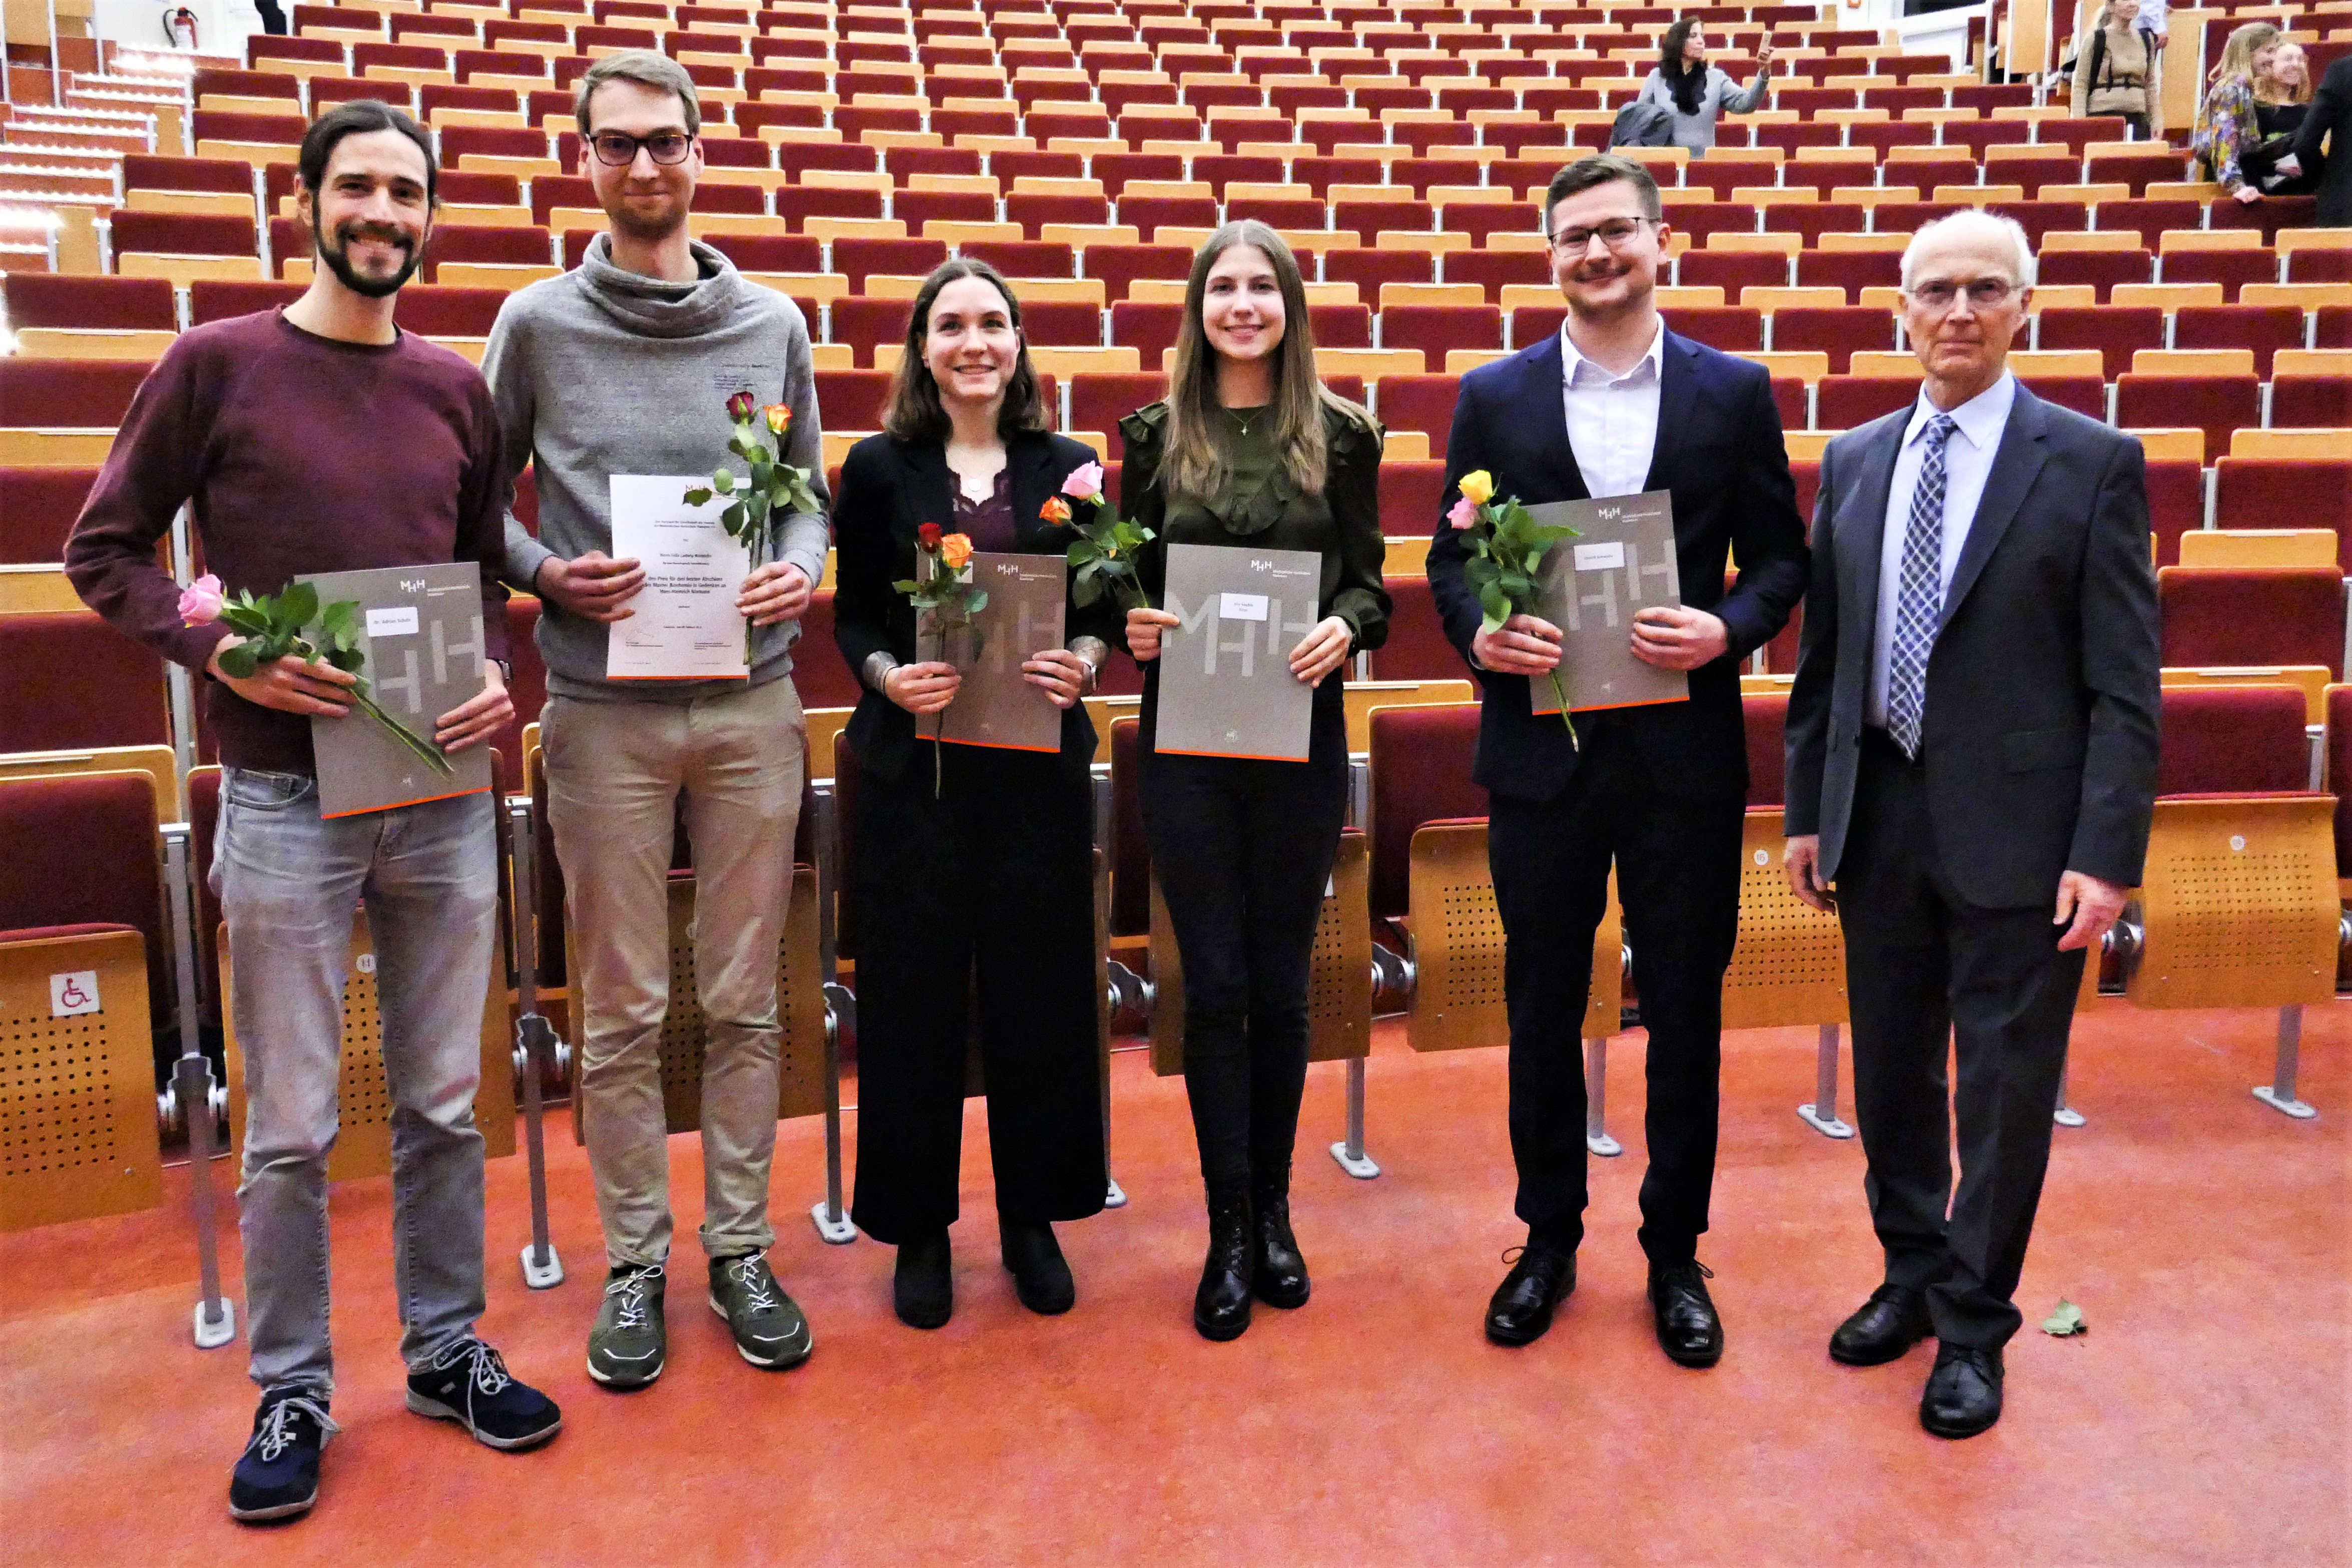  Prof Dr Siegfried Piepenbrock from the Society of Friends of the MHH e.V. presented the study prizes to (from left): Dr Adrian Schulz (Biomedical Data Science), Felix Warnecke (Biochemistry), Laura Kampe (Biochemistry), Lily Sophie Rose (Biomedicine) and Jannik Dörrie Schwabe (Biomedicine).